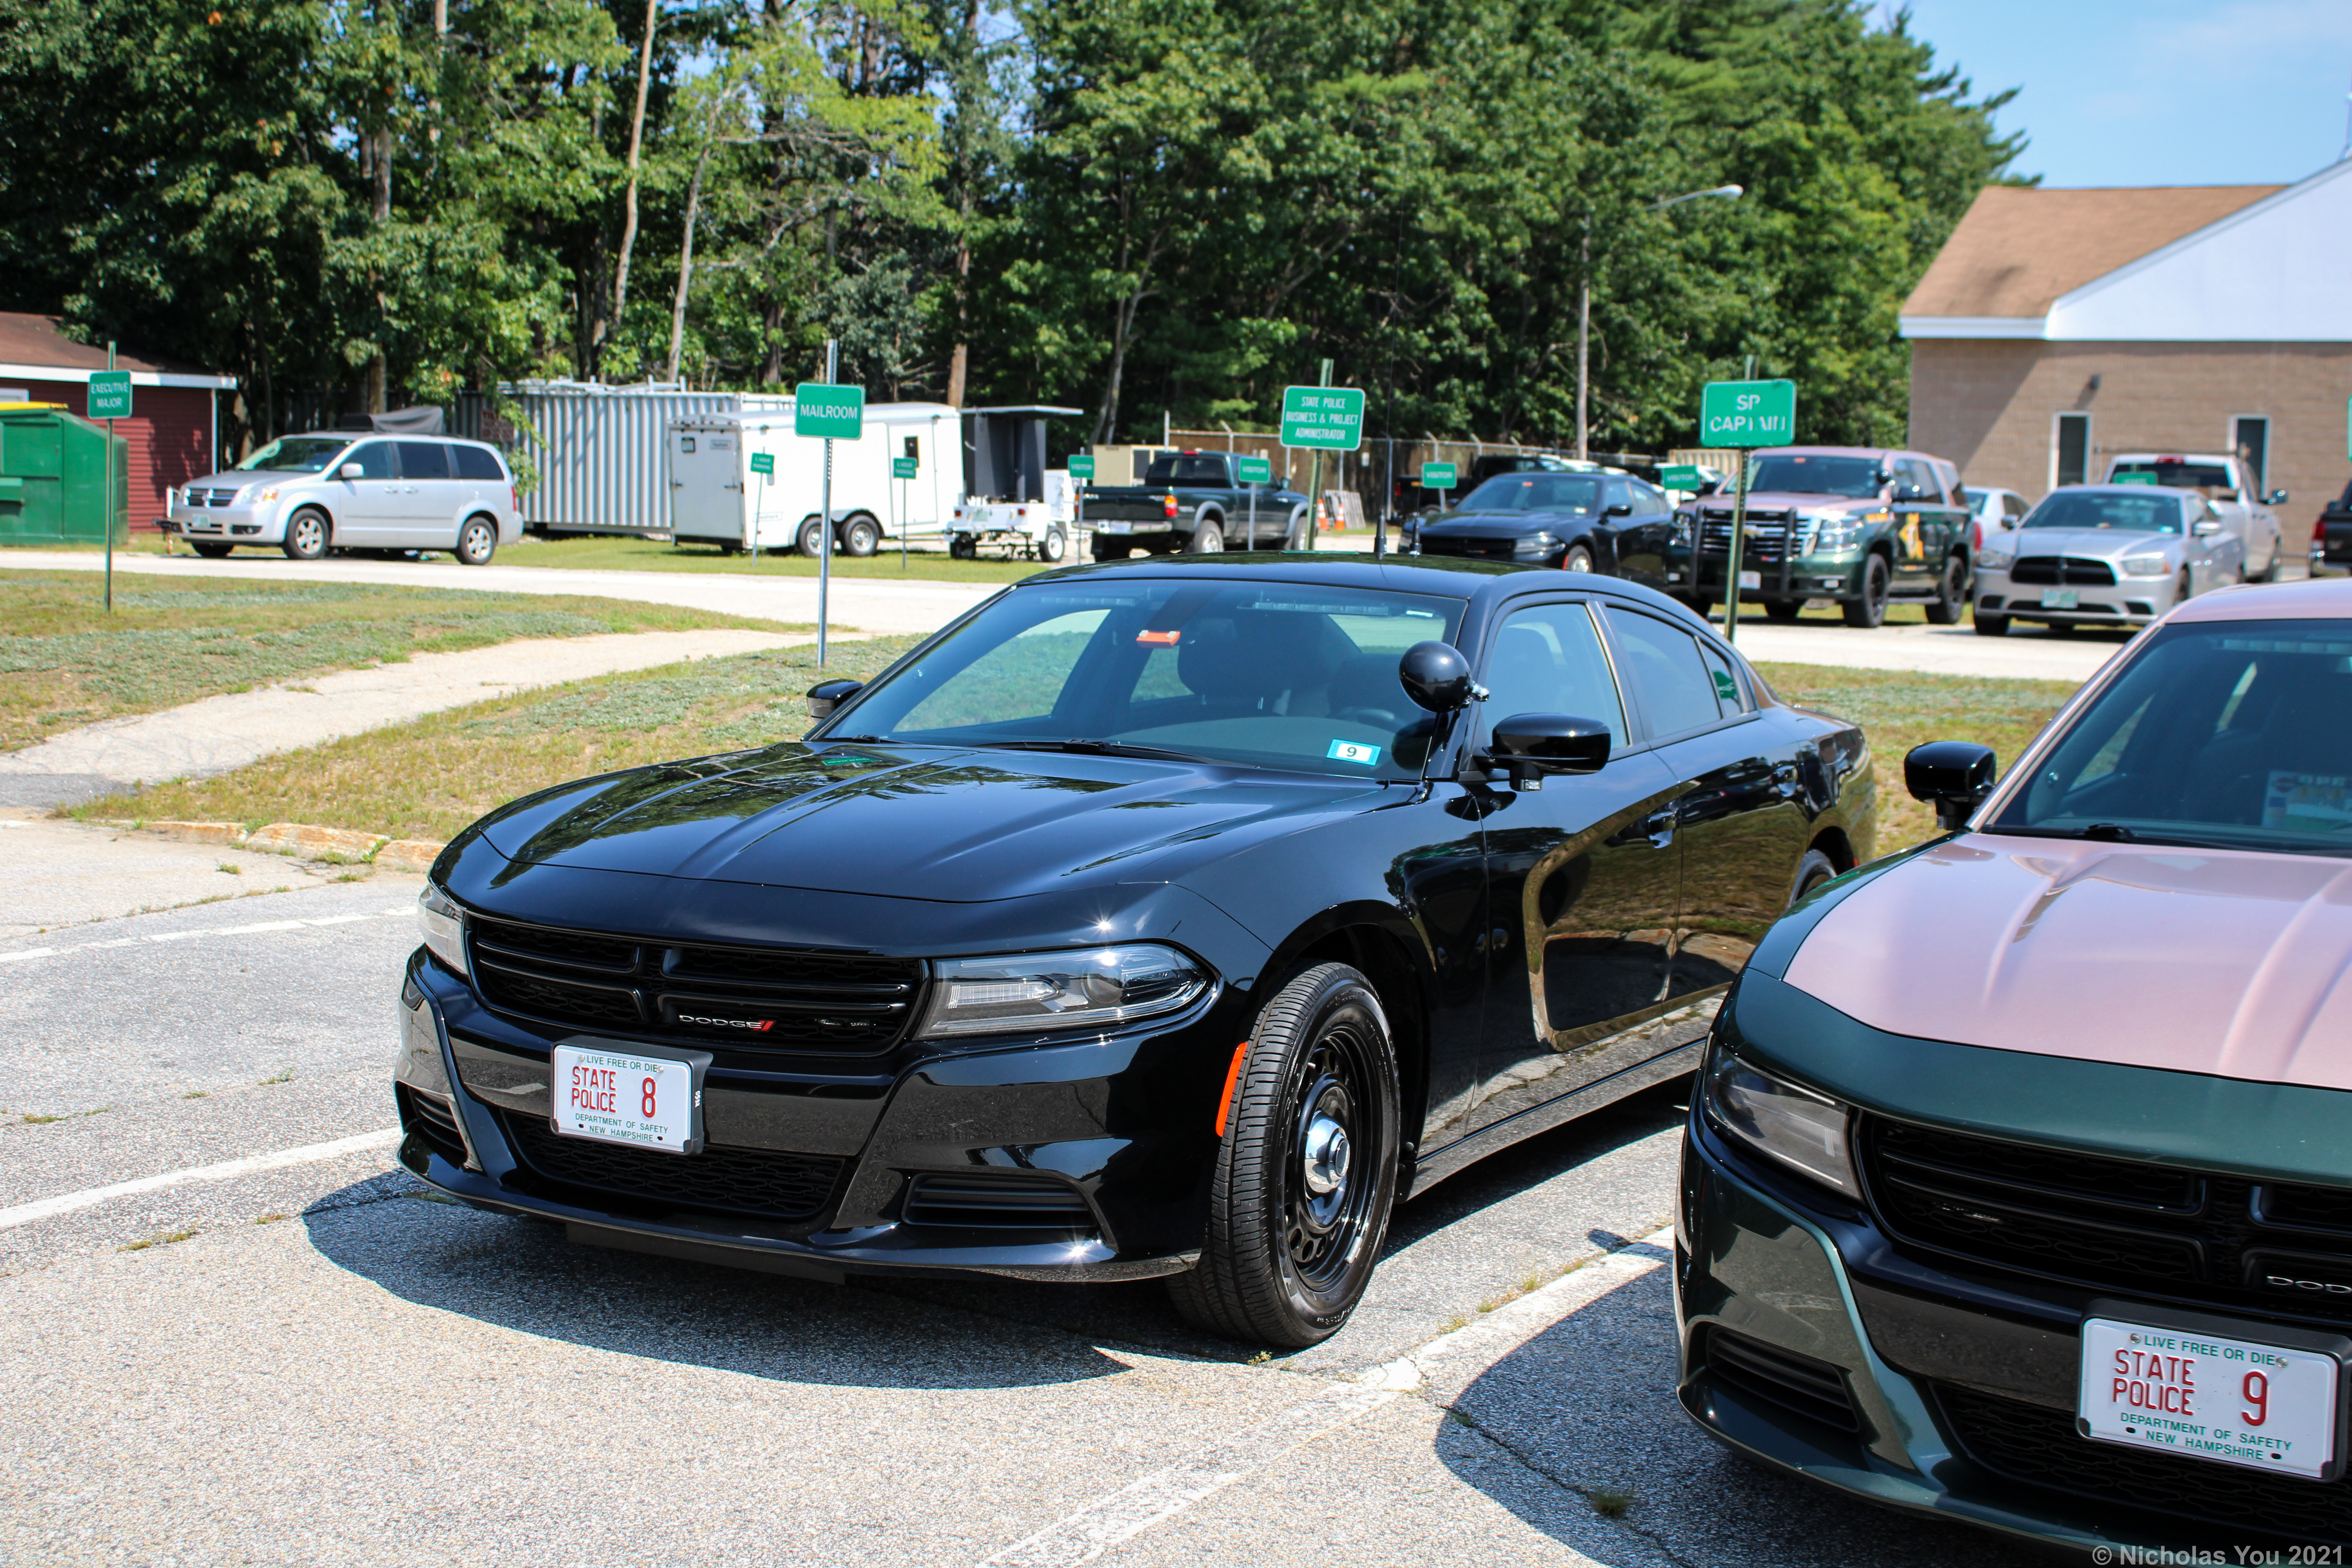 A photo  of New Hampshire State Police
            Cruiser 8, a 2015-2019 Dodge Charger             taken by Nicholas You